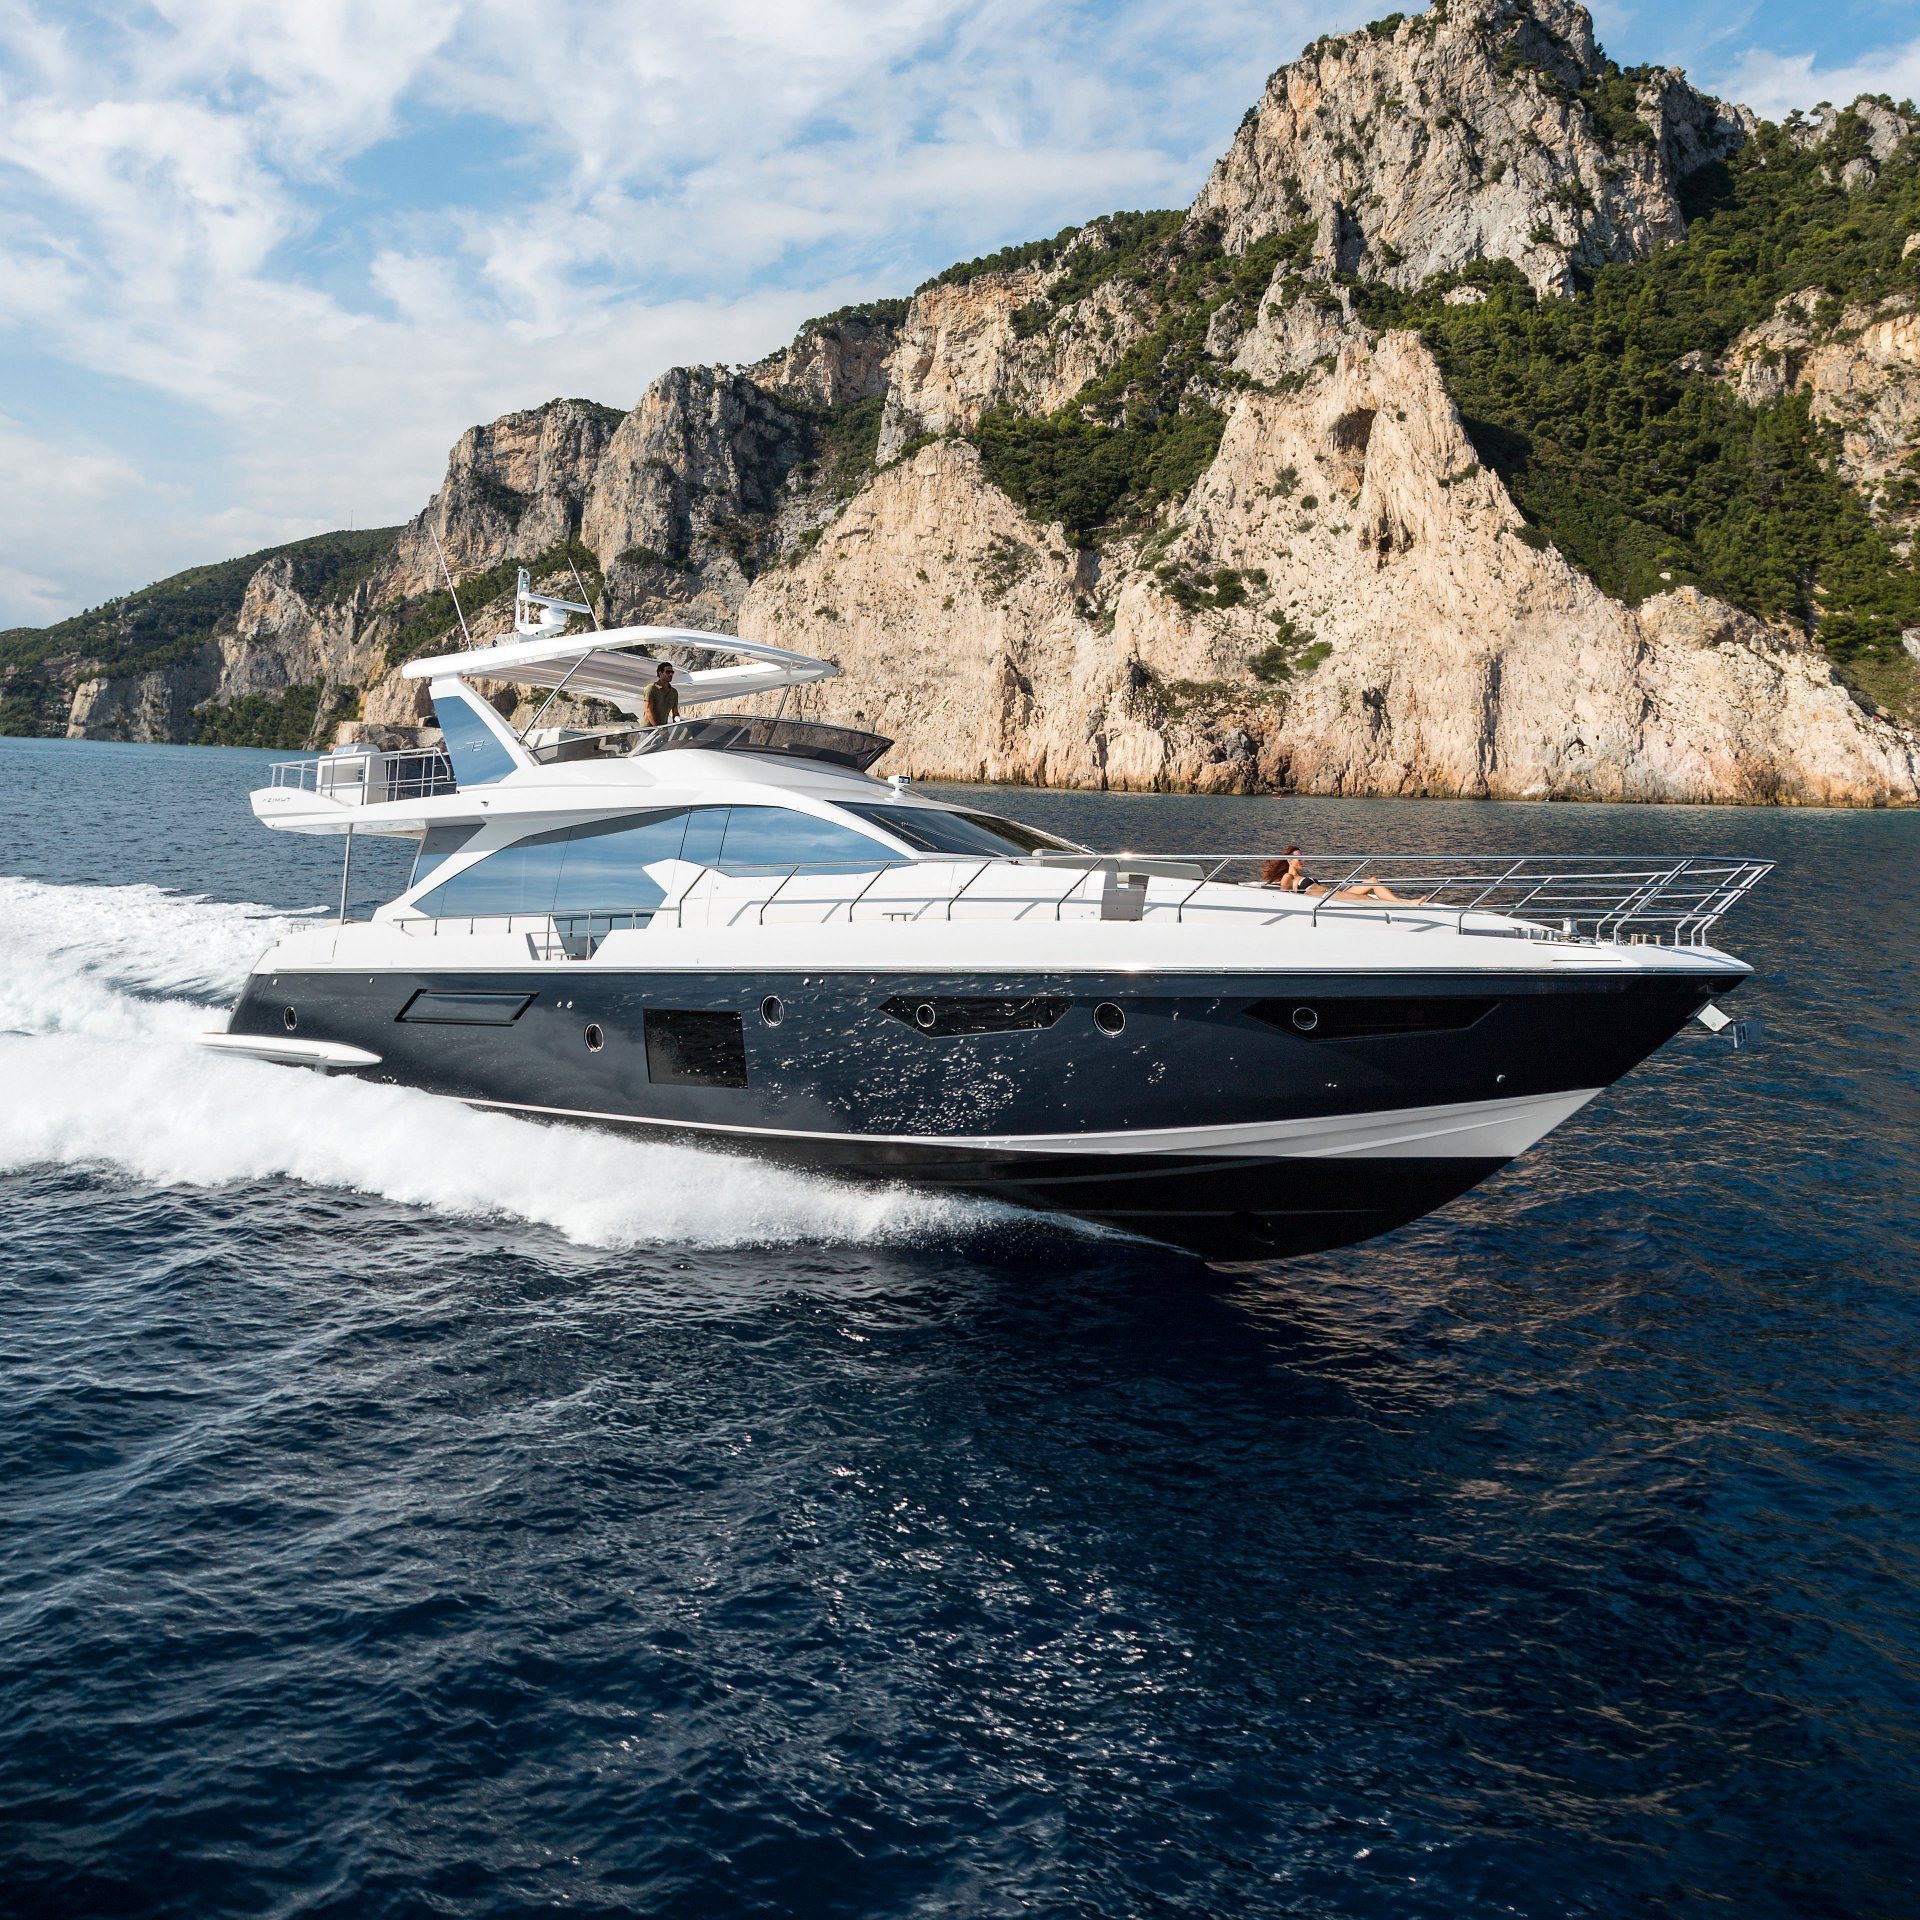 360 VR Virtual Tours of the Azimut Fly 72